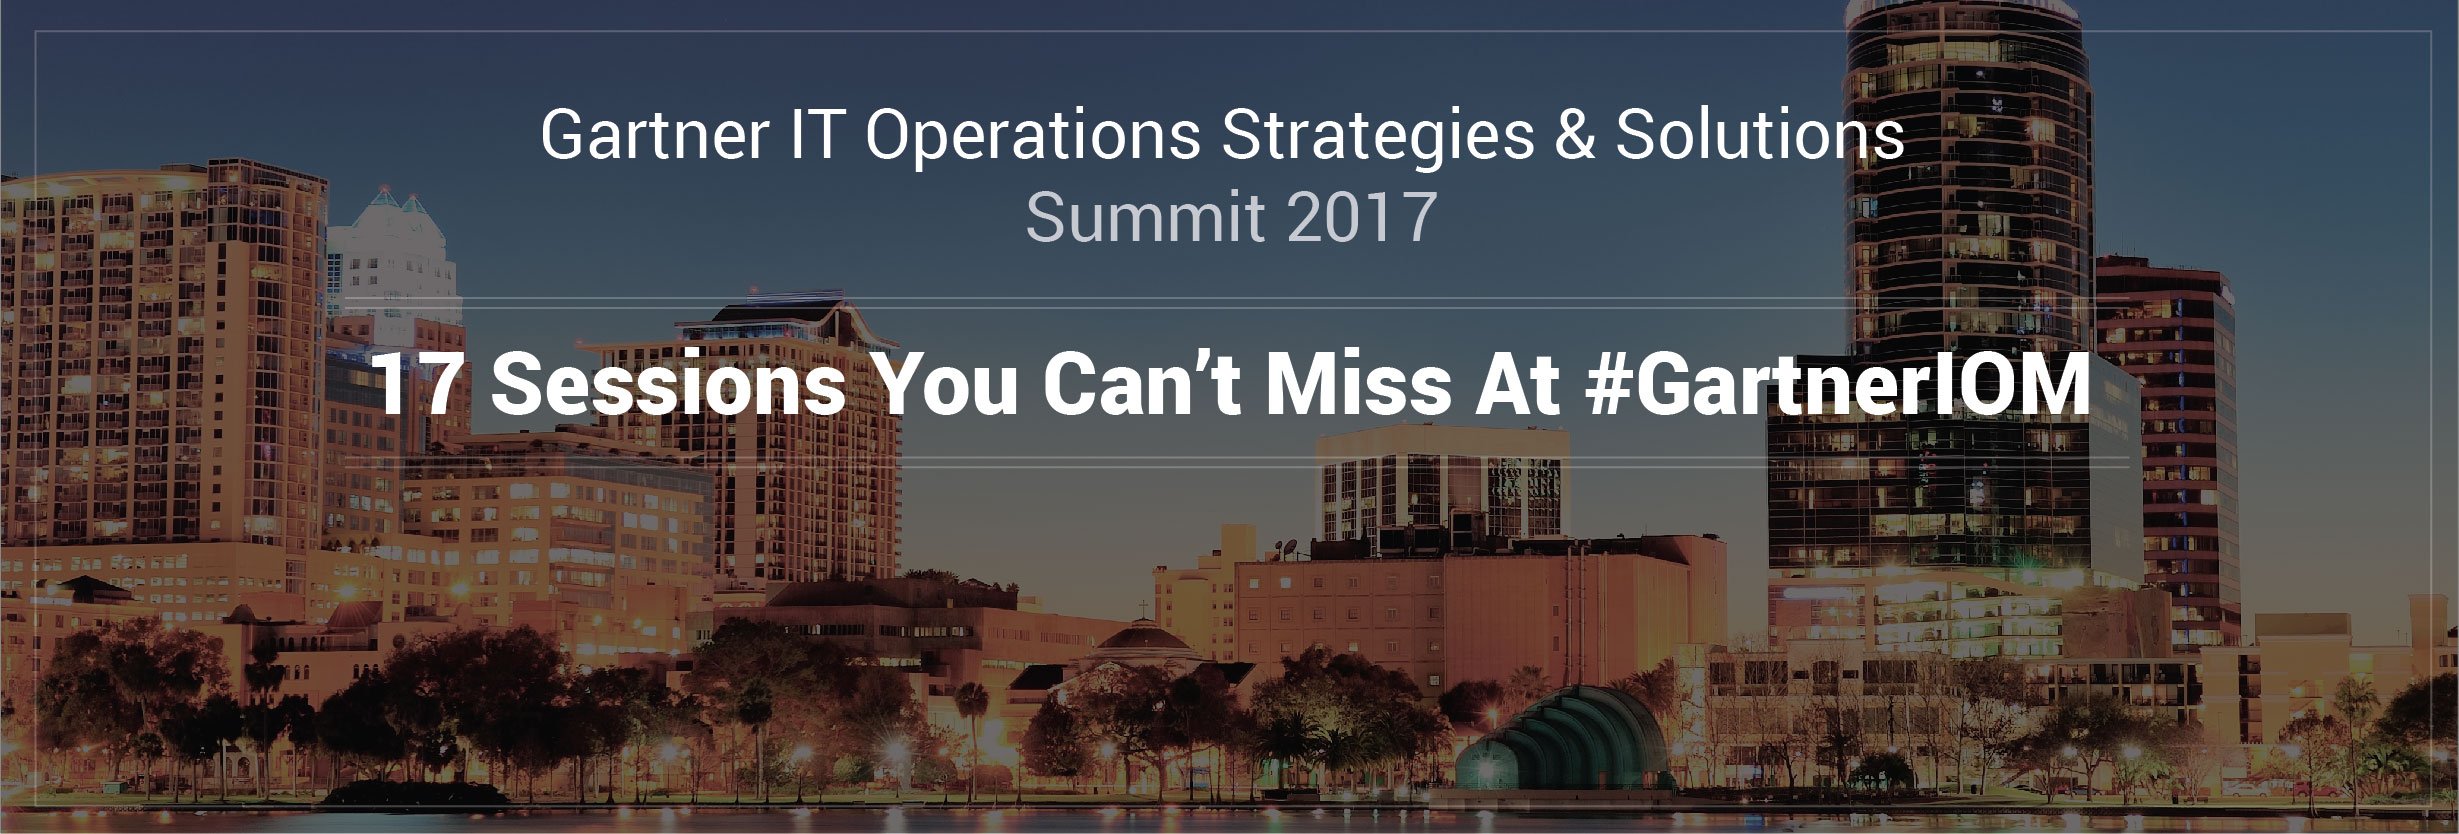 Our Top 17 Session Picks for Gartner IT Operations Strategies & Solutions Summit